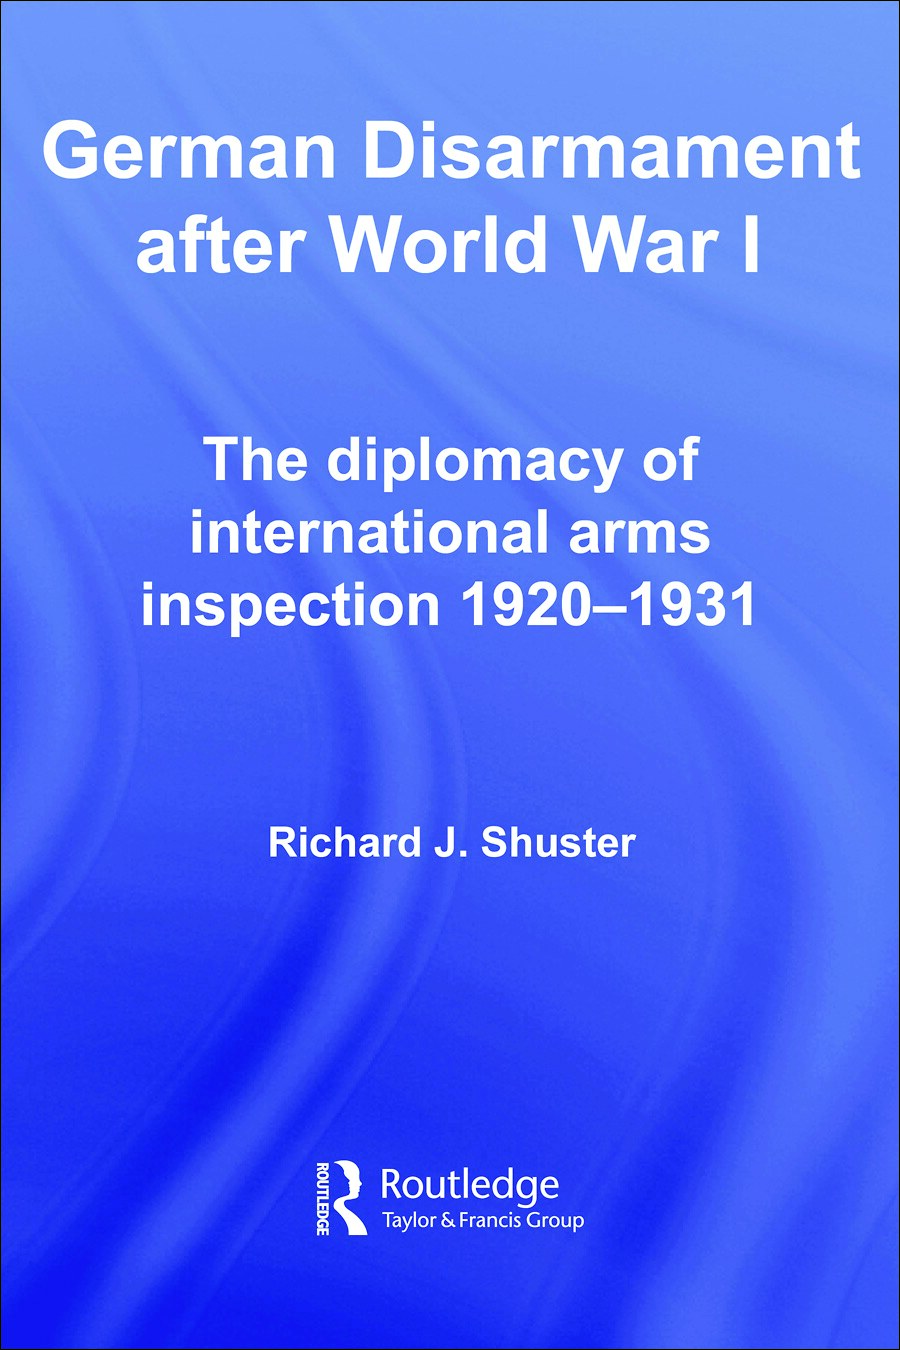 German Disarmament After World War I: The Diplomacy of International Arms Inspection 1920-1931